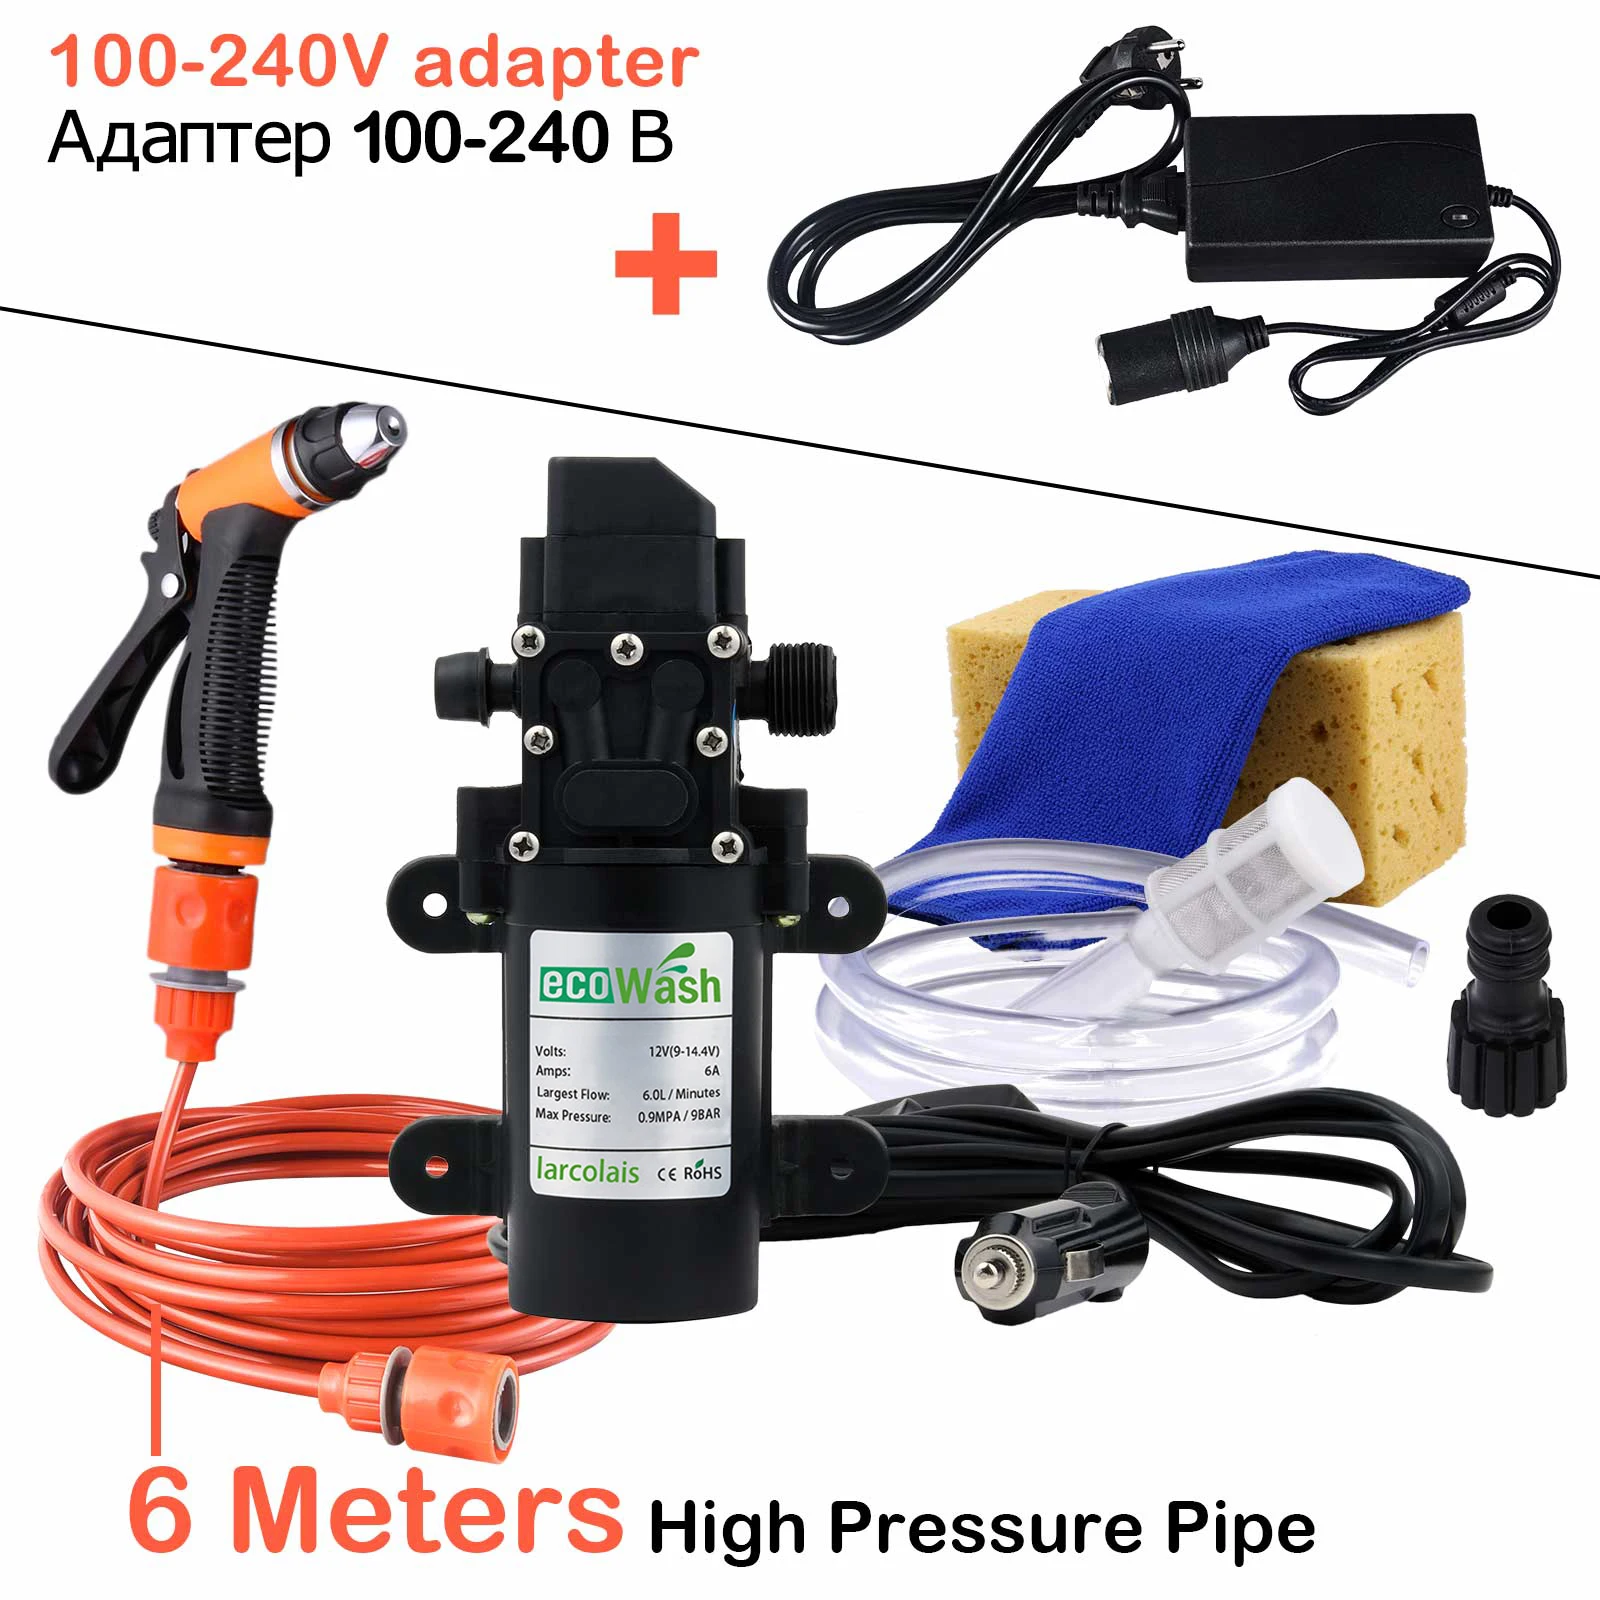 car wash sprayer Car Wash 12V Washer Car Gun Pump High Pressure Cleaner Car Care Portable Washing Machine Electric Cleaning Auto Device best pressure washer for cars Car Washing Tools